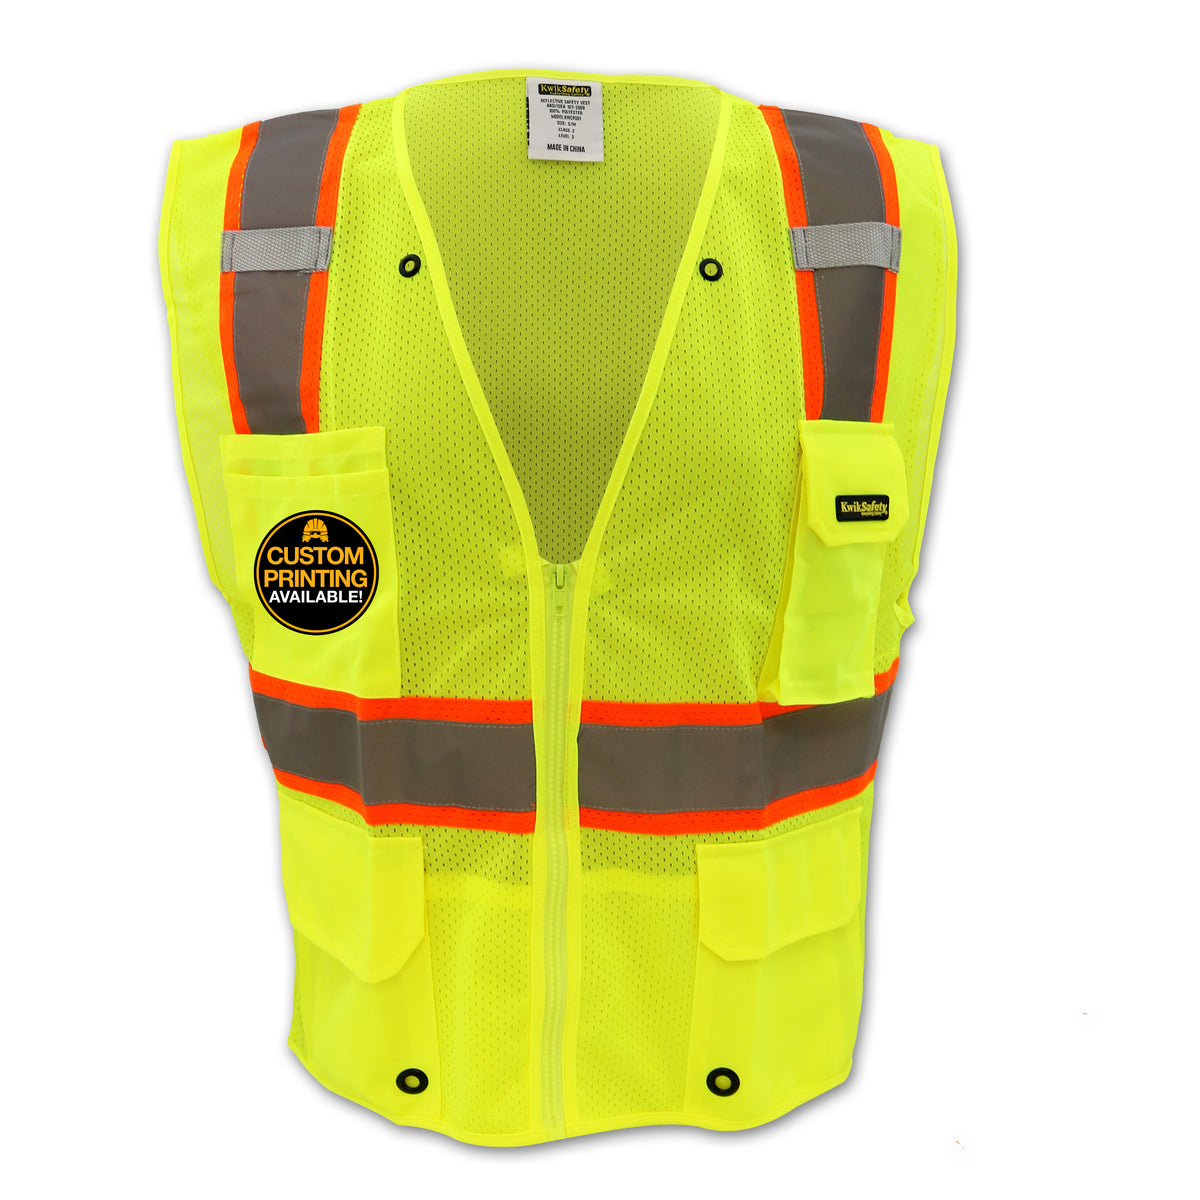 Ultra Cool Reflective Safety Vest | High Visibility by KwikSafety